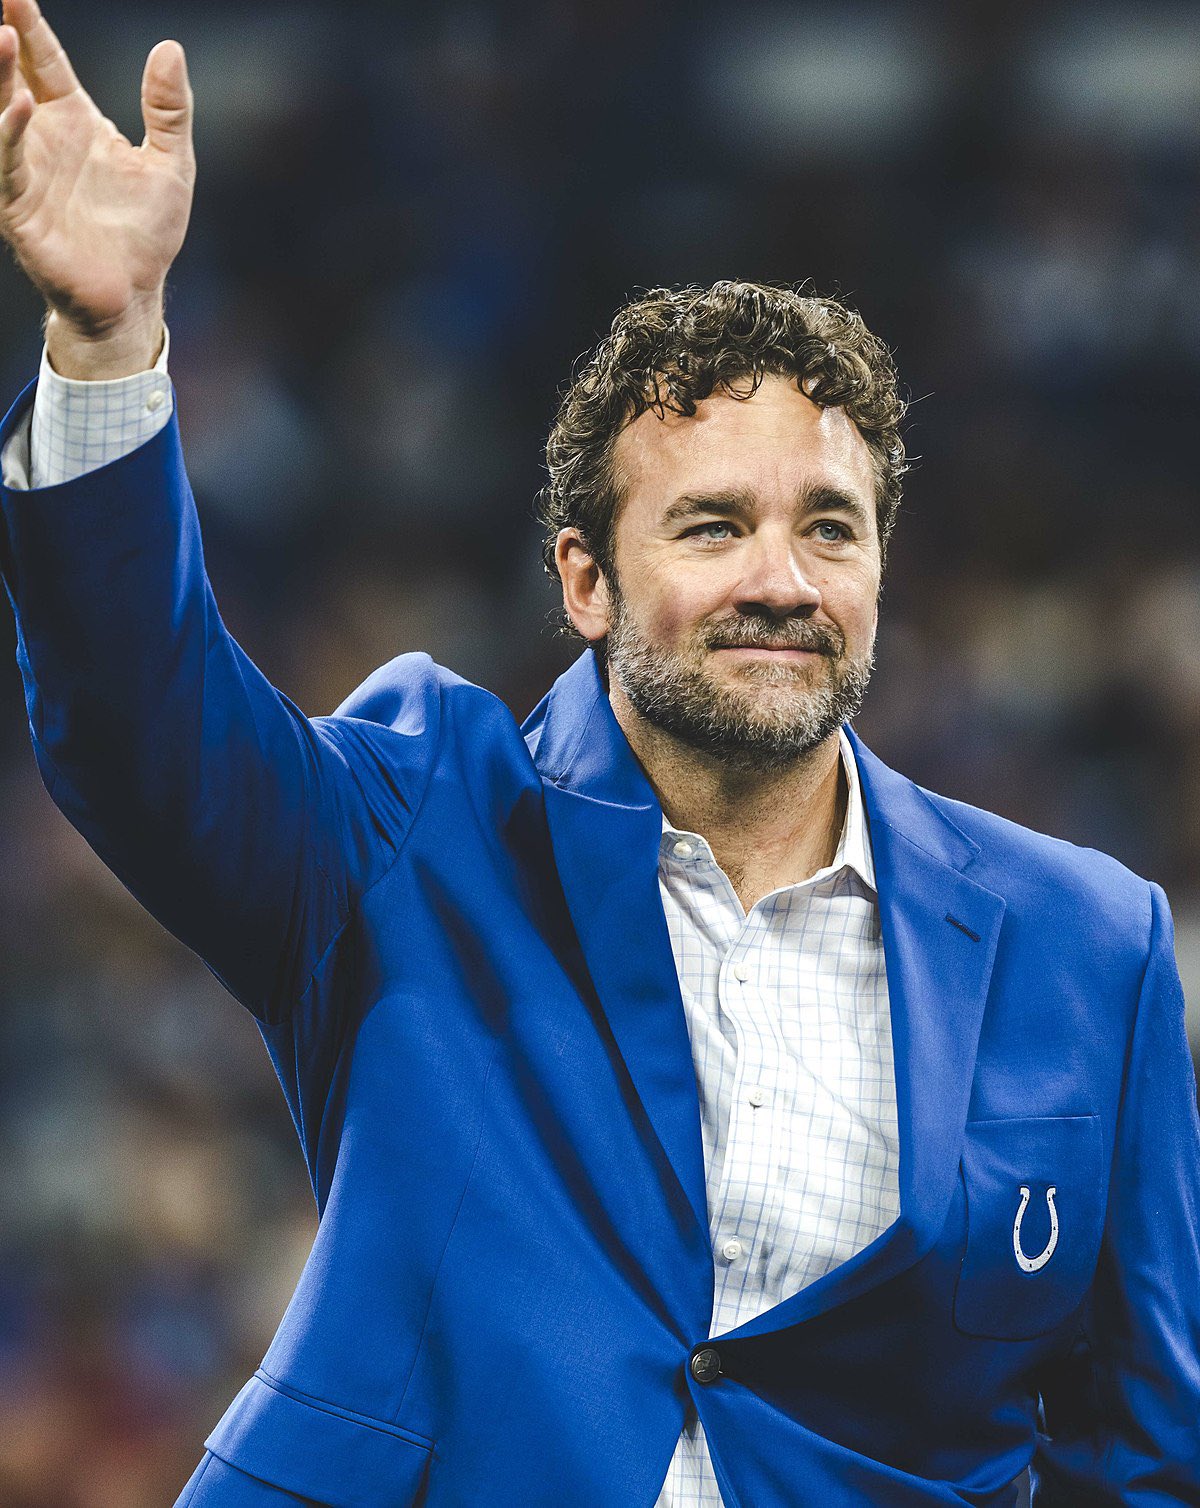 Who is Jeff Saturday?